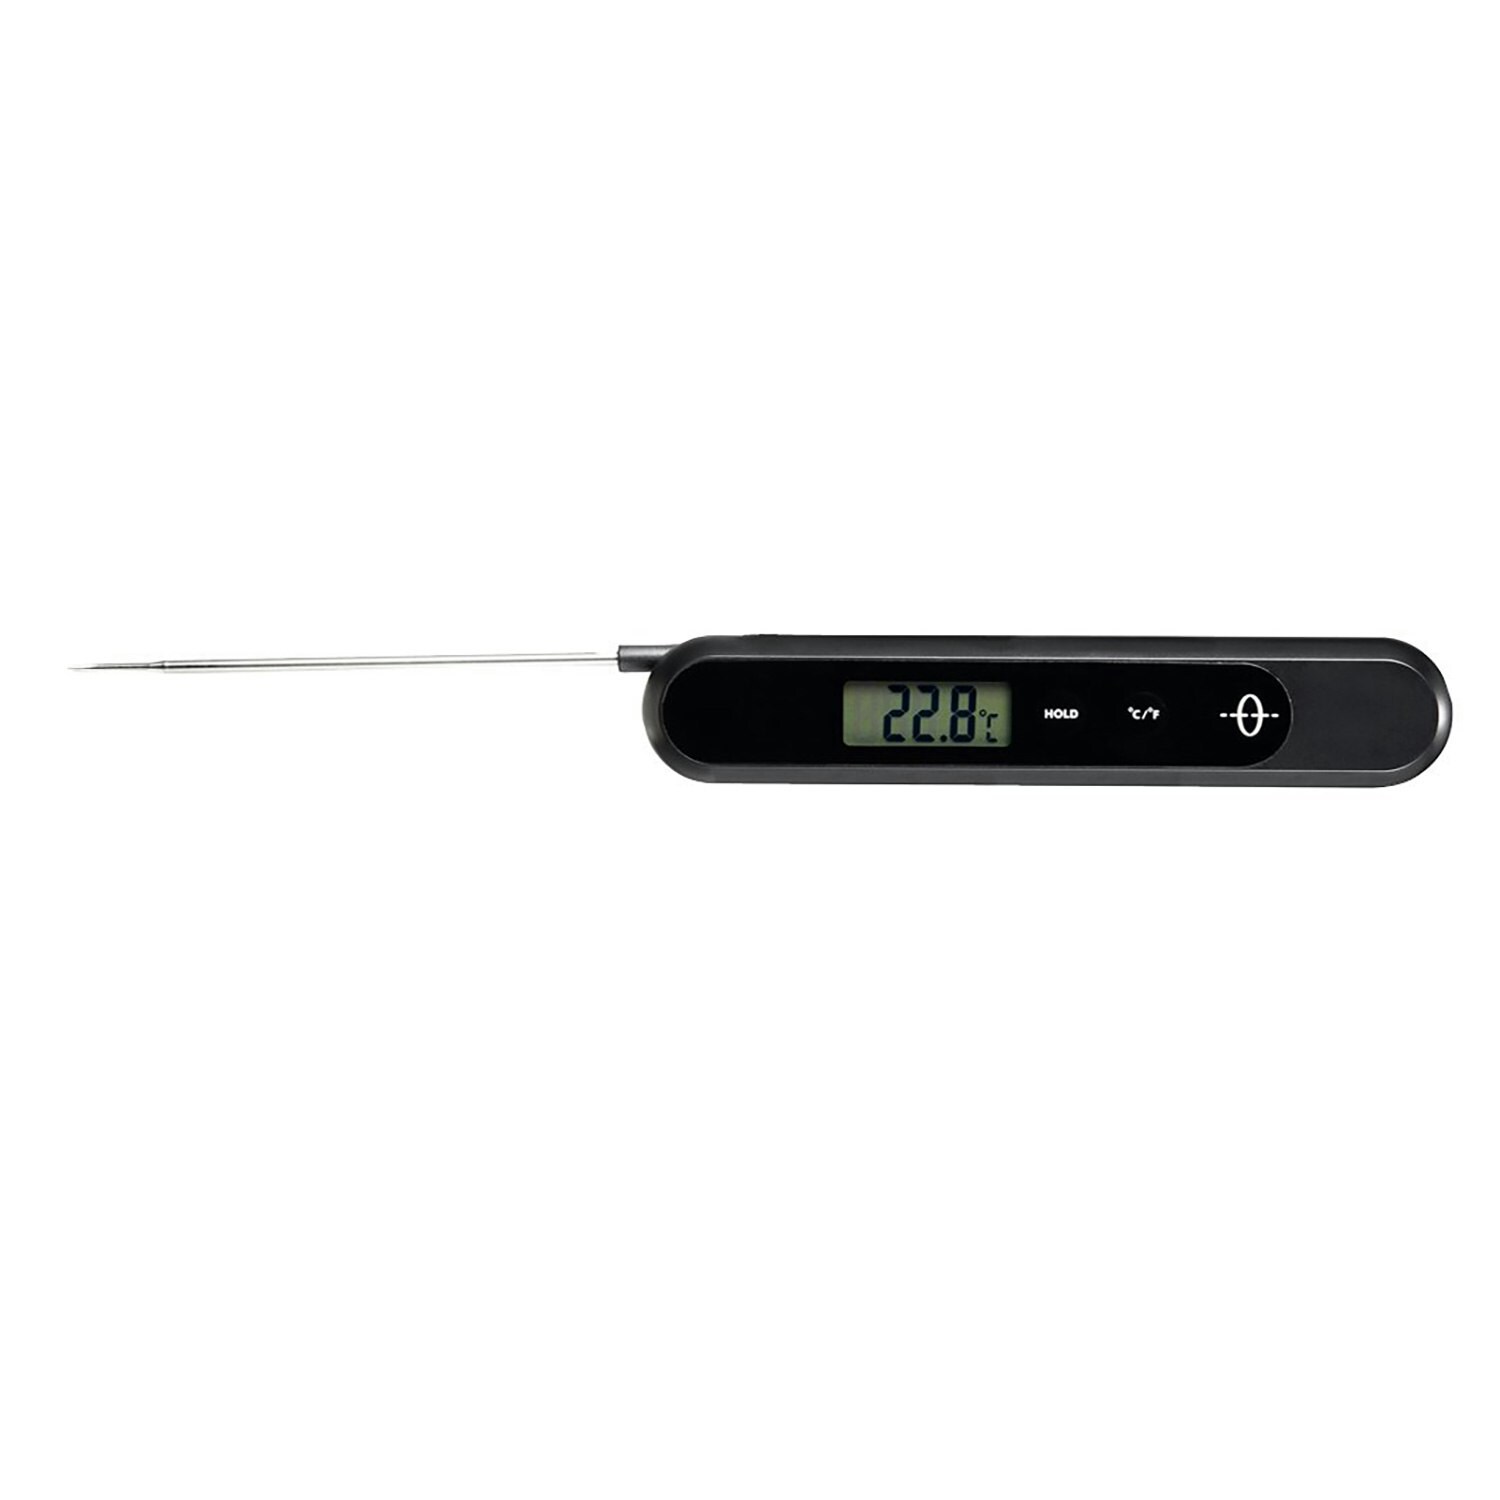 https://royaldesign.com/image/18/dorre-stacy-meat-thermometer-0